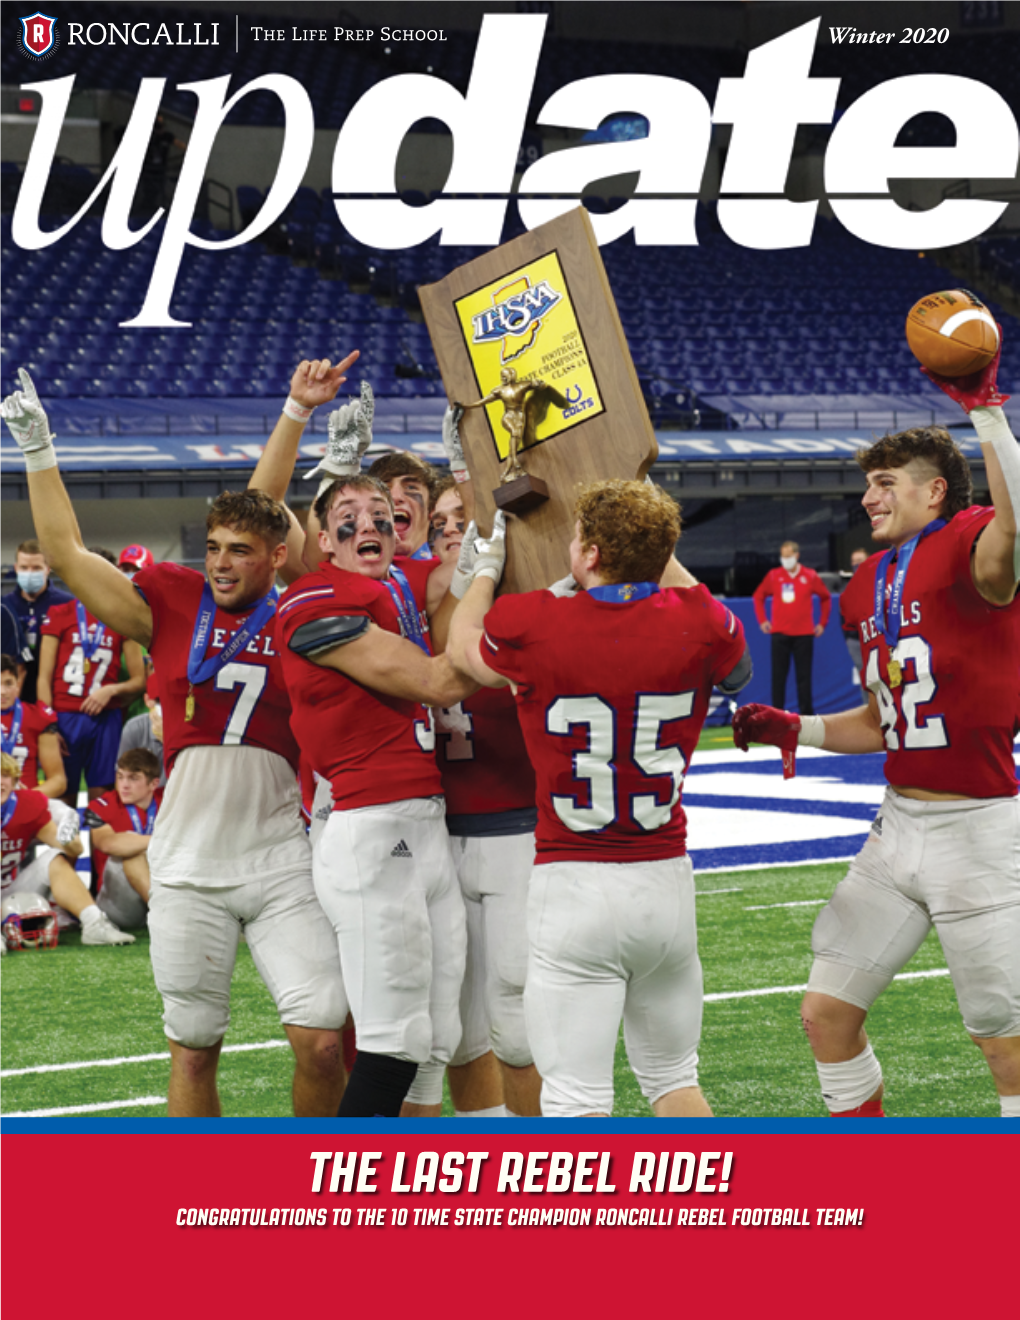 The Last Rebel Ride! Congratulations to the 10 Time State Champion Roncalli Rebel Football Team! Winter Update 2020 Table of Contents